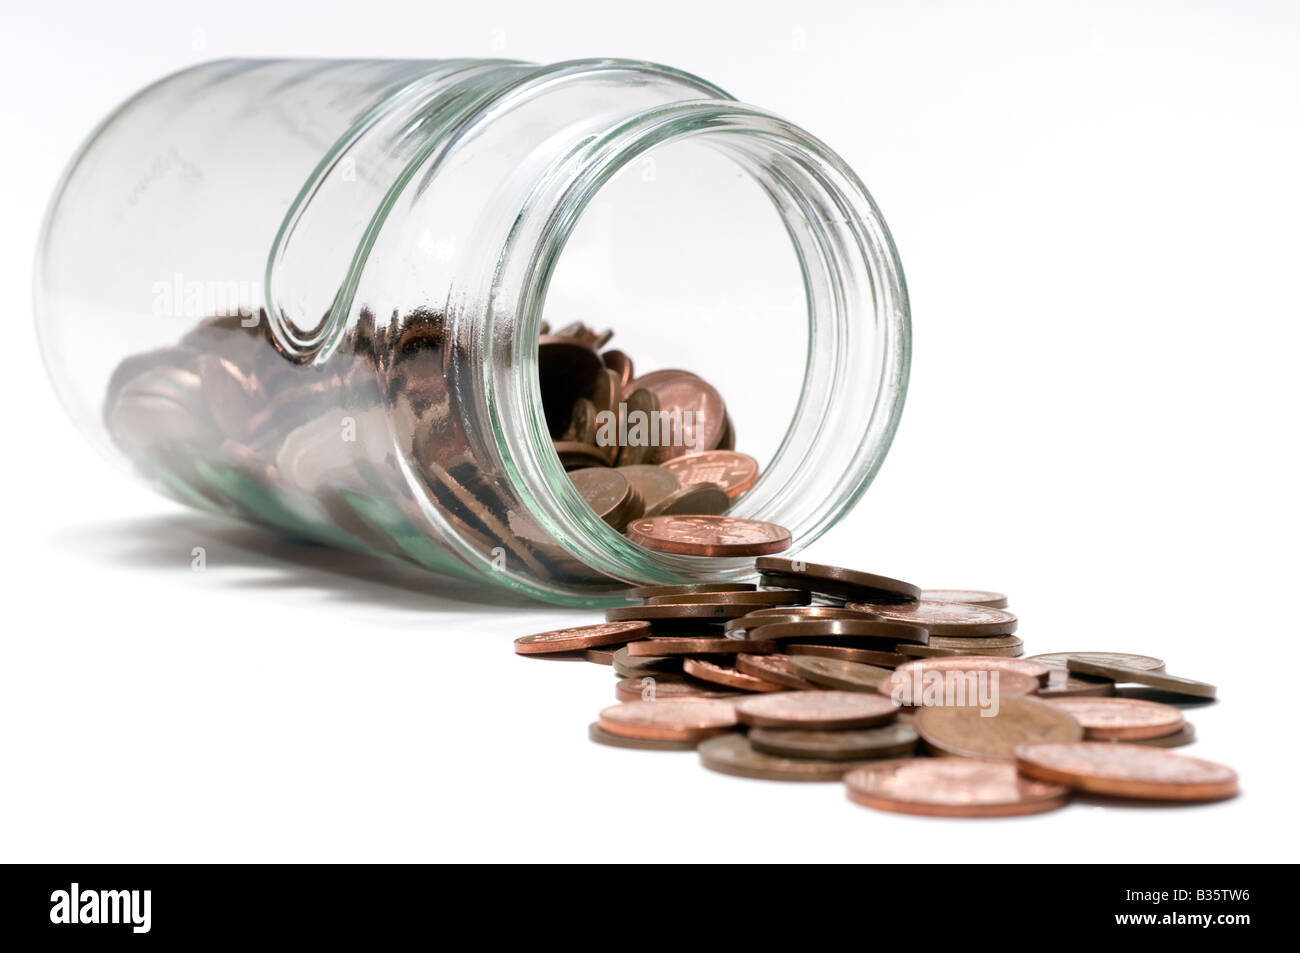 Glass jar spilling out copper coins Stock Photo